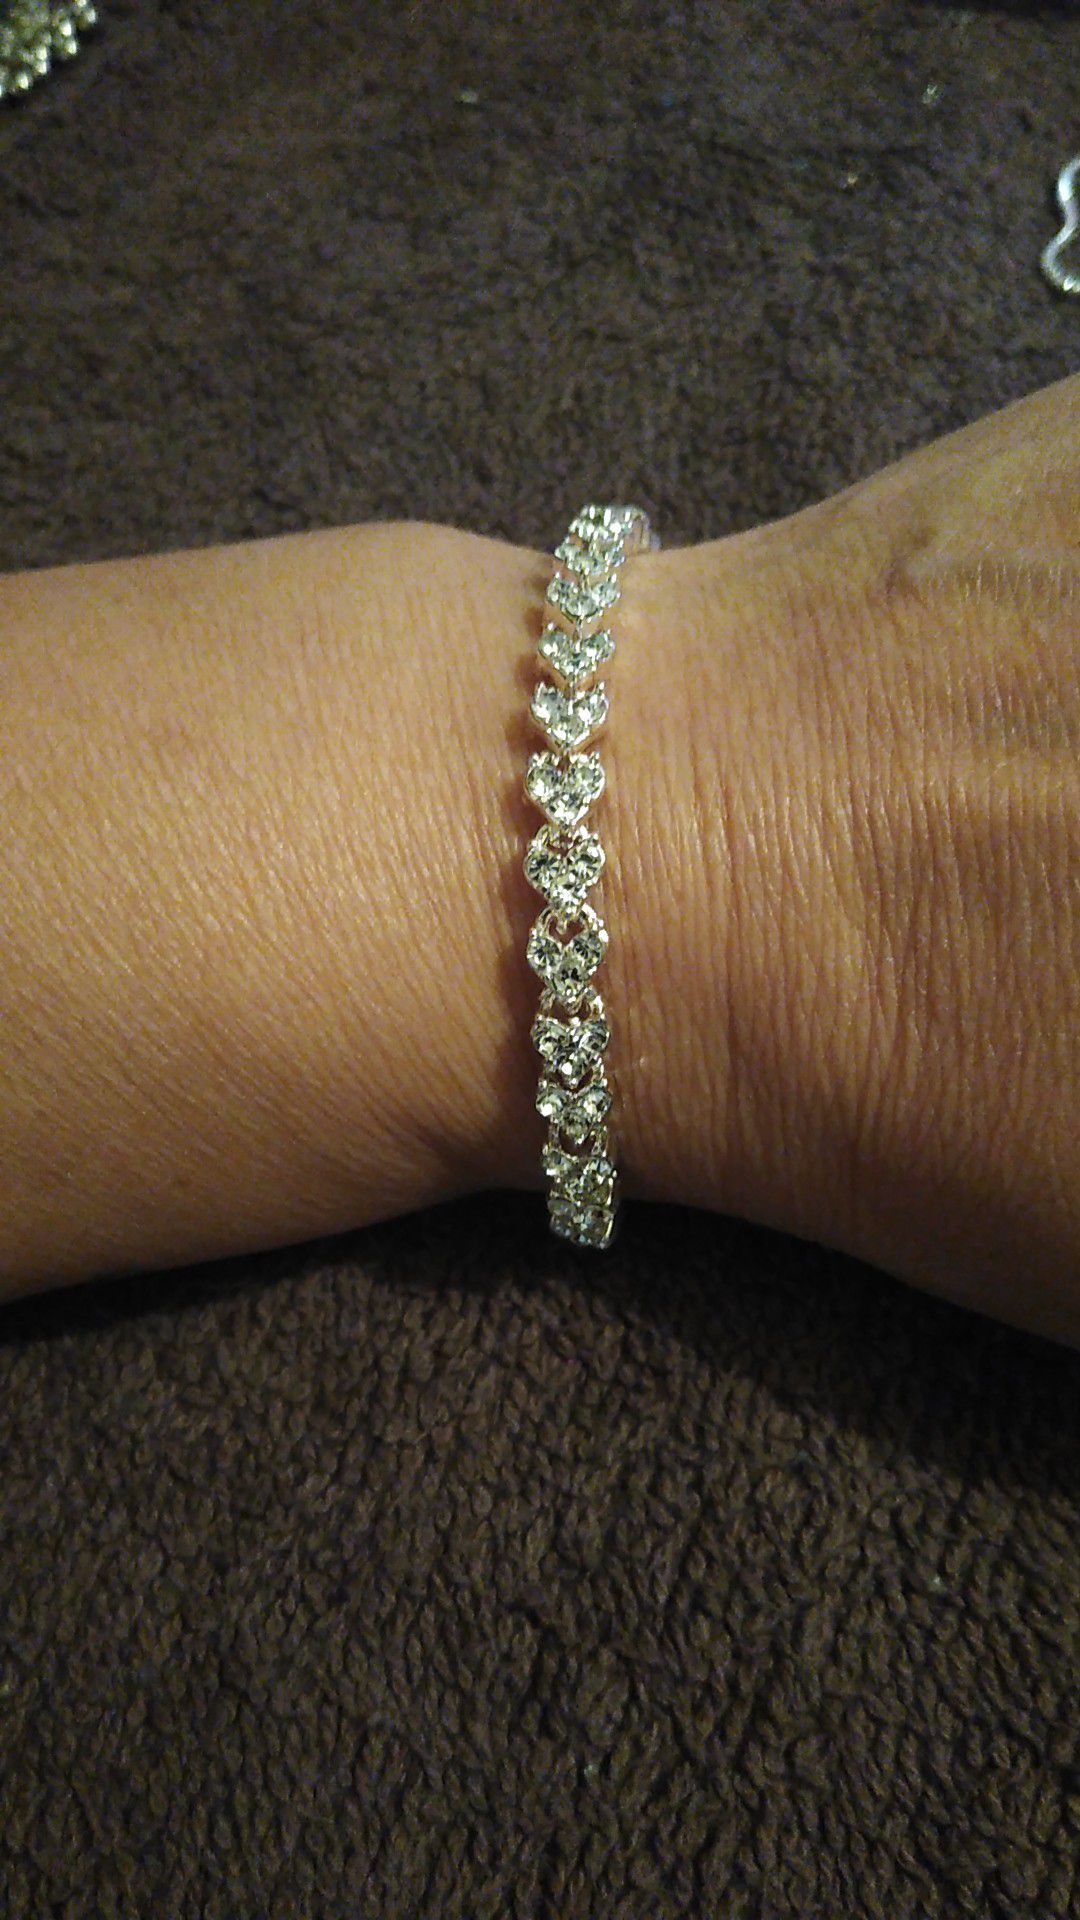 Brand new silver ladies bracelet with hearts